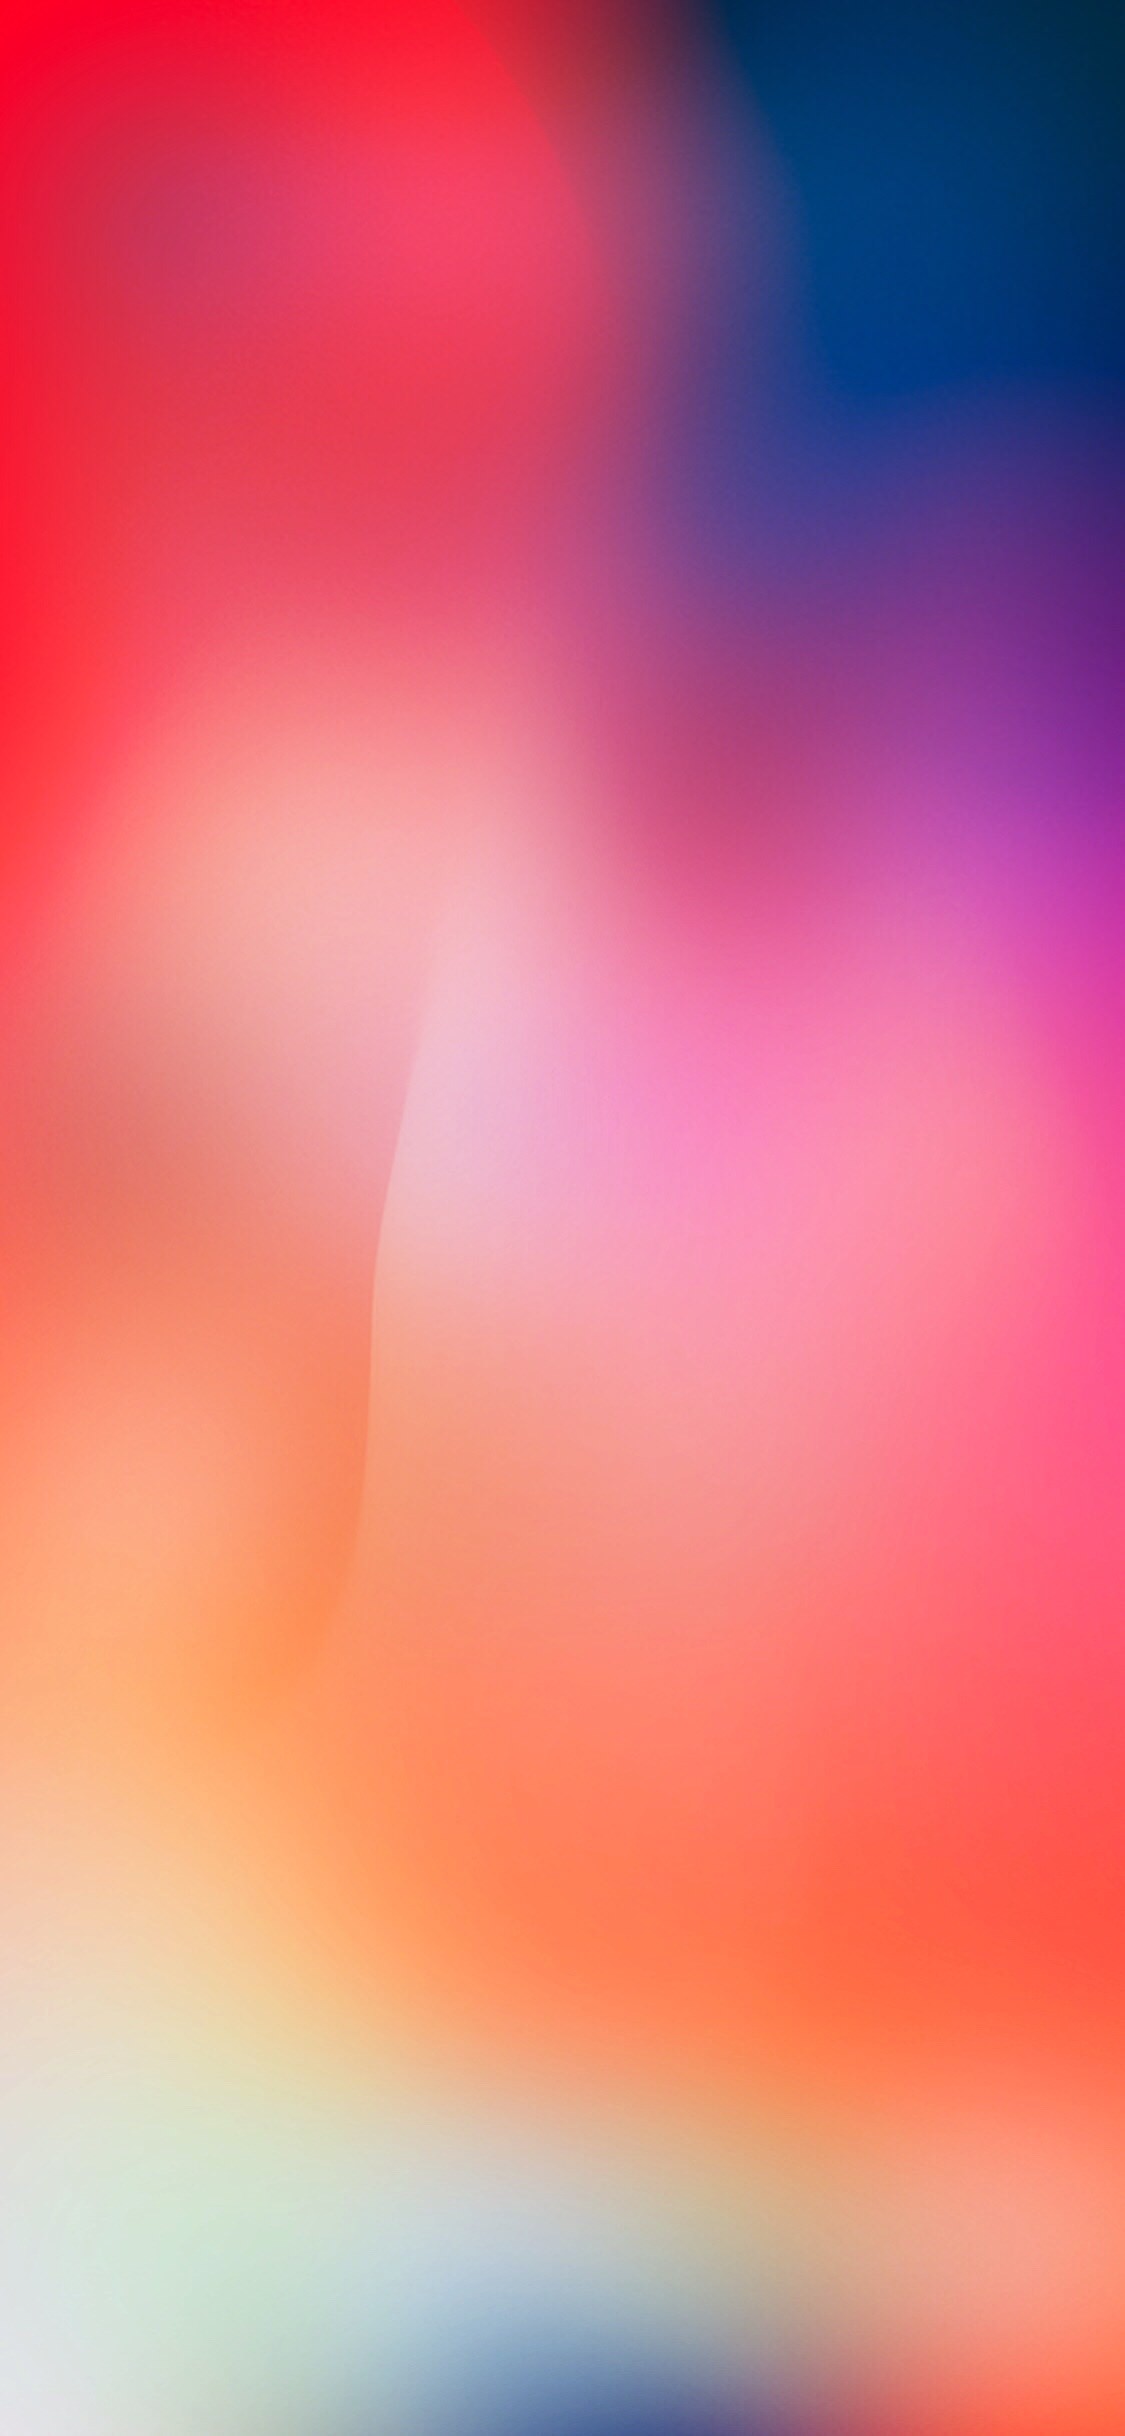 iPhone X Wallpaper Lock Screen With high-resolution 1125X2436 pixel. You can set as wallpaper for Apple iPhone X, XS Max, XR, 8, 7, 6, SE, iPad. Enjoy and share your favorite HD wallpapers and background images